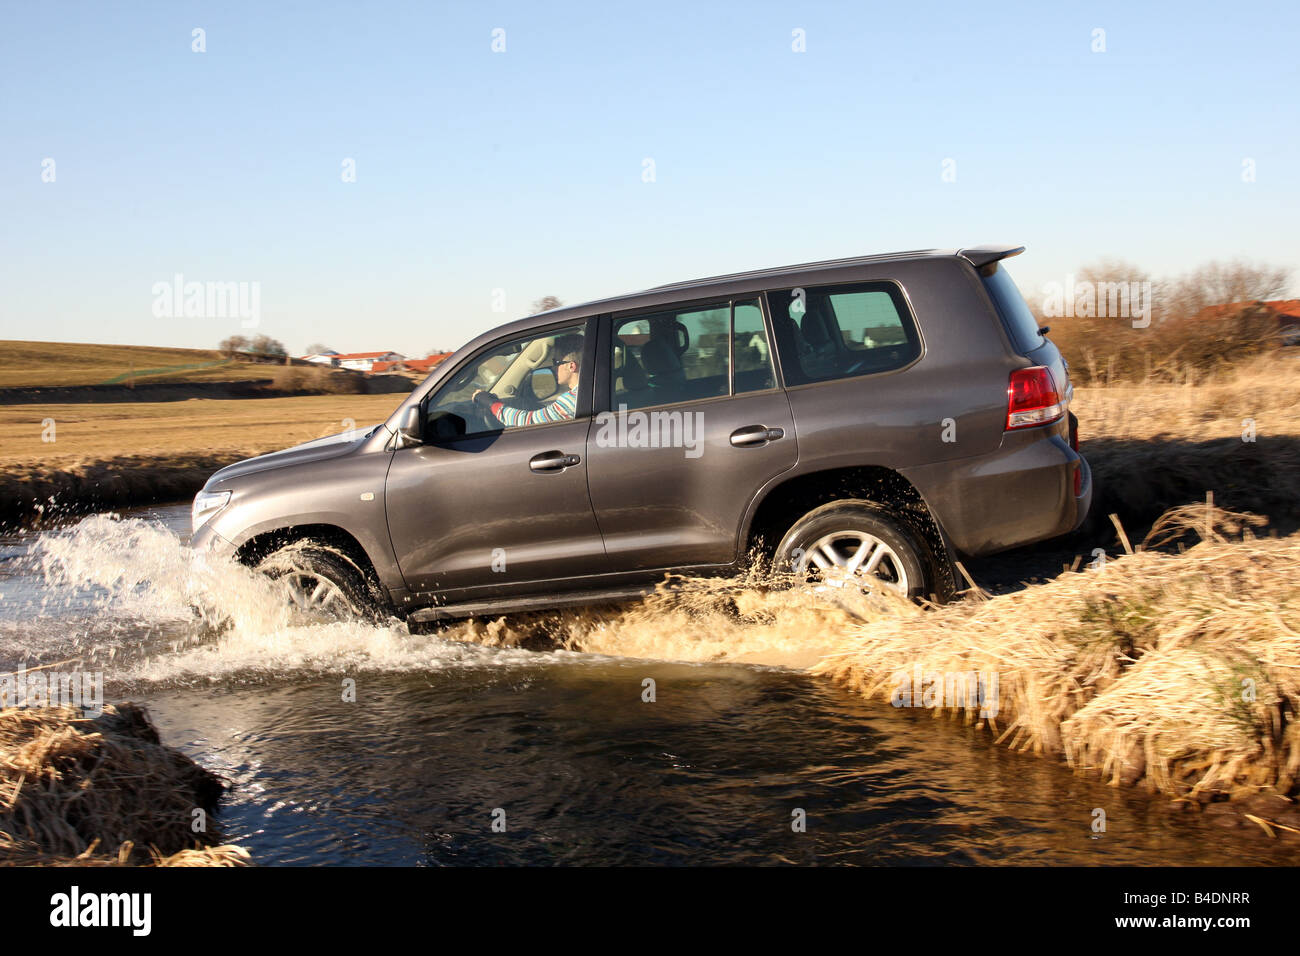 Toyota Landcruiser V8 4.5 D-4D, model year 2008-, anthracite, driving, side view, offroad, Water Stock Photo